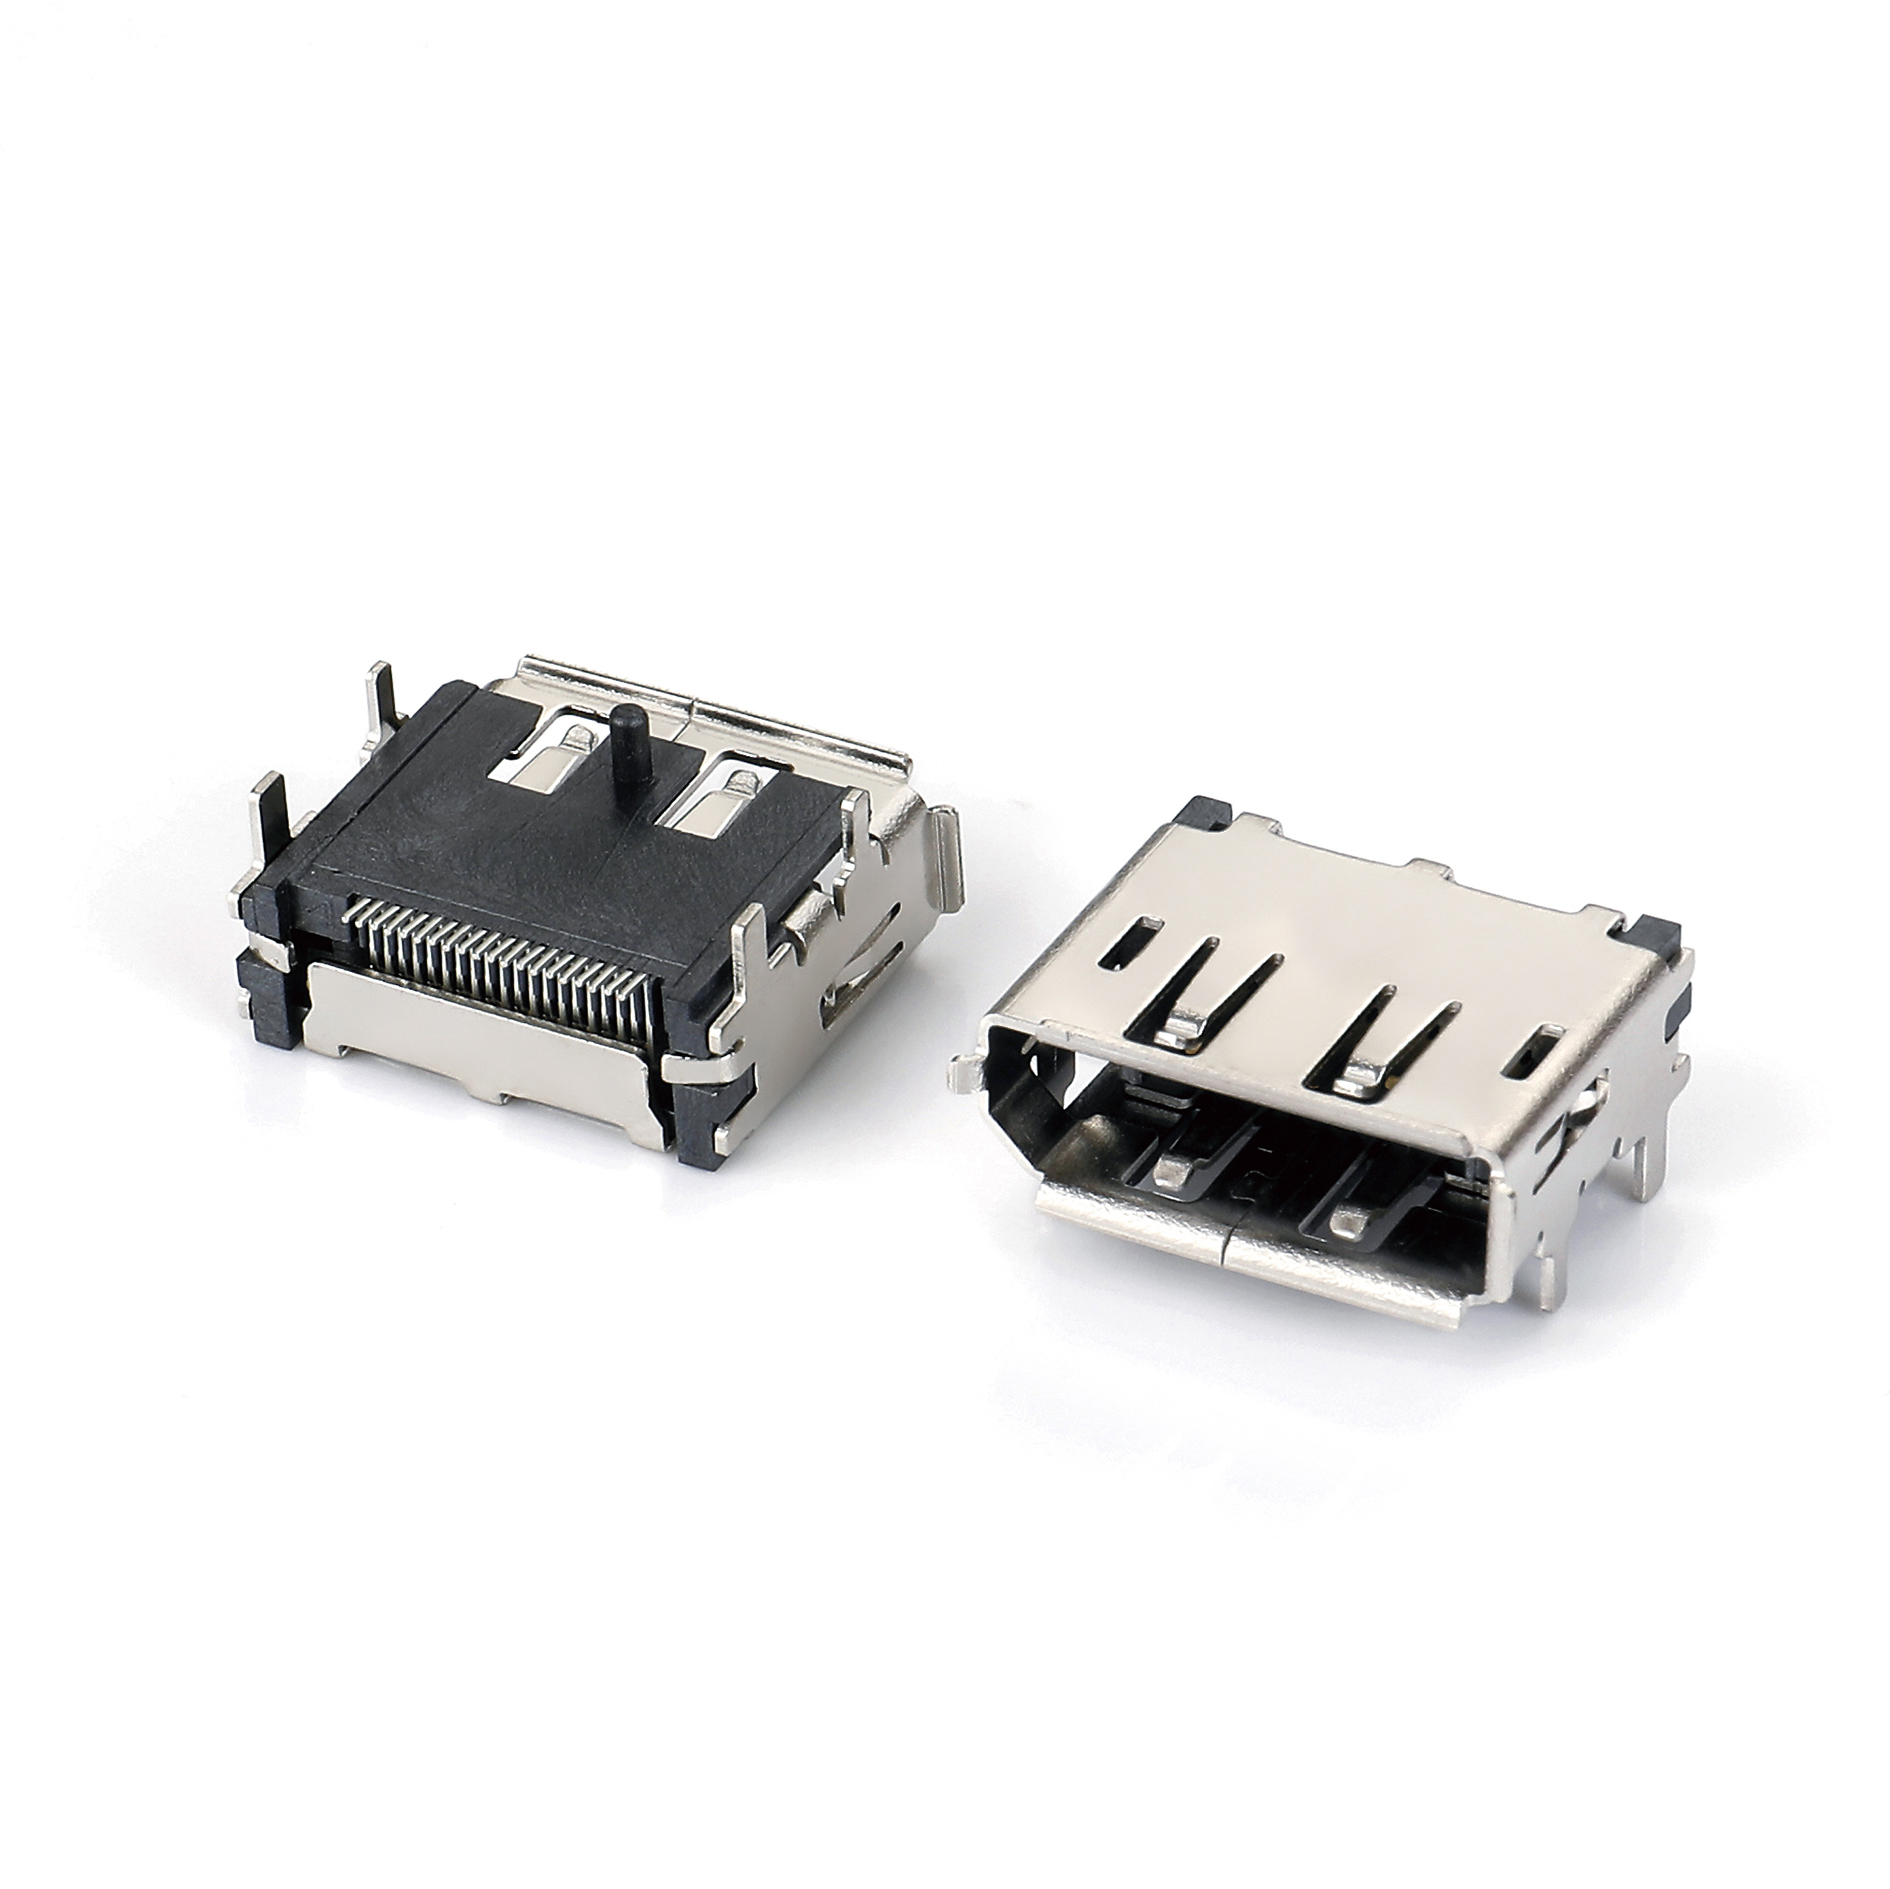 10AT-1209 DP 20F SMT with elastic four pin plug-in board with card point single column